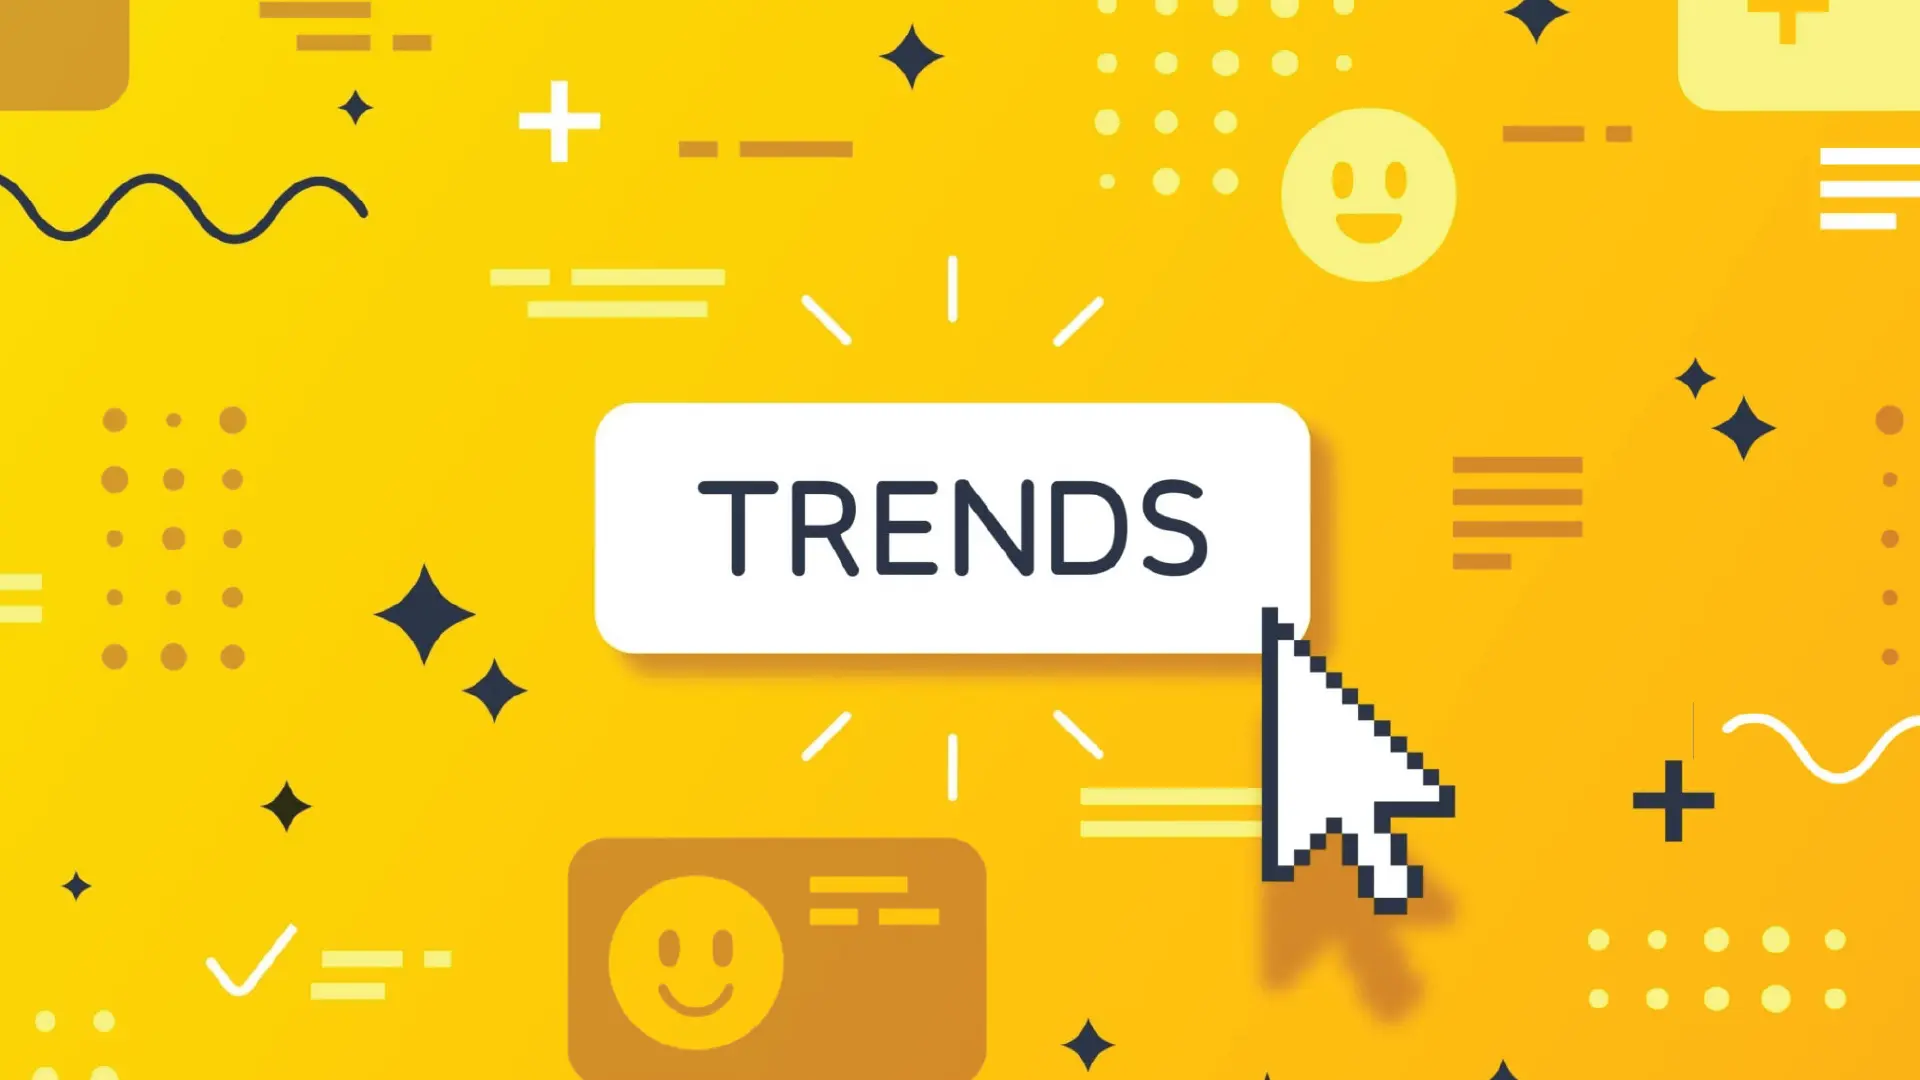 A illustration of Trends